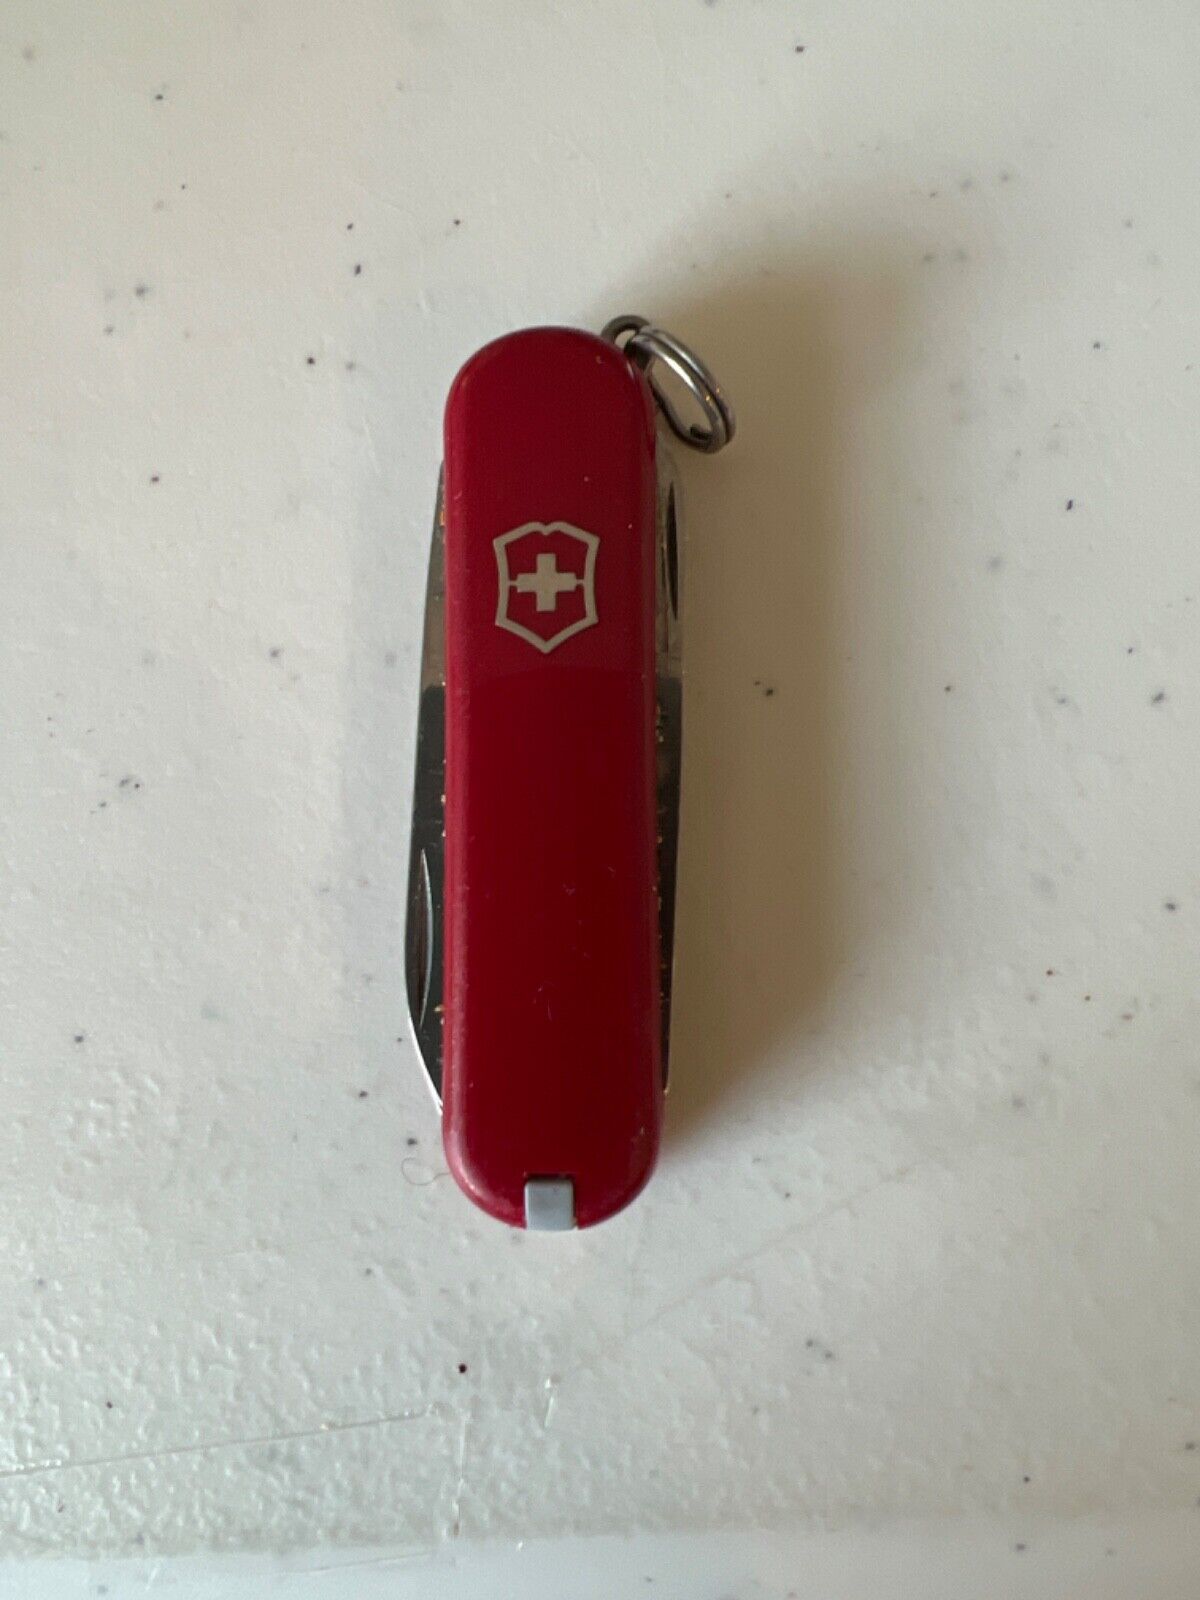 Victorinox Swiss Army Classic SD 58mm Pocket Knife Assorted Colors 7 tools, gift